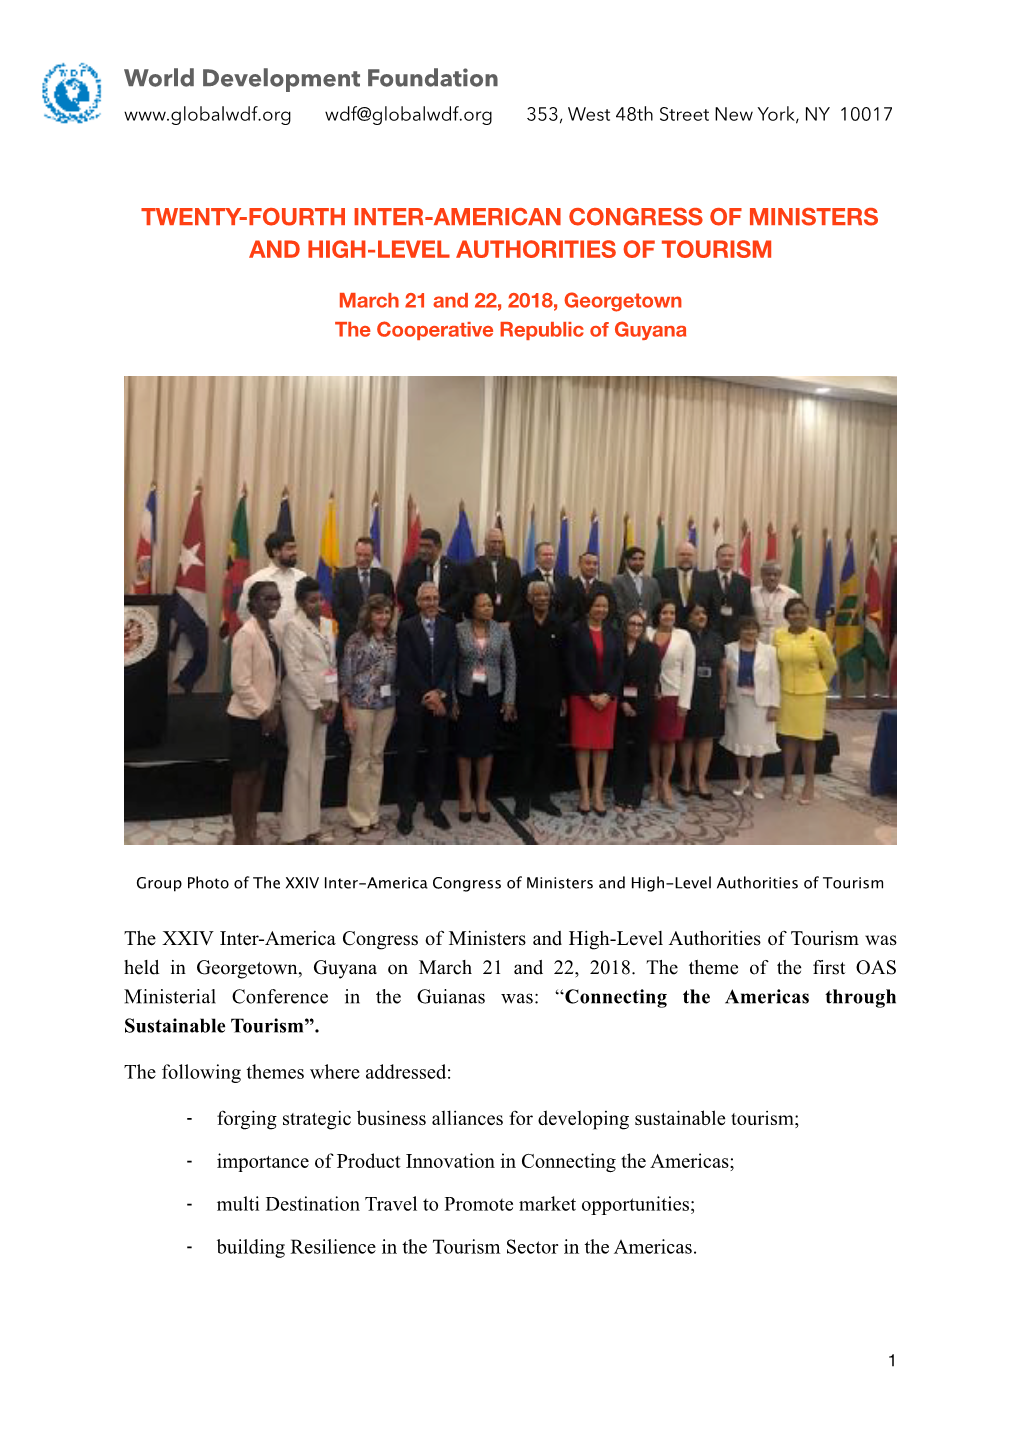 WDF, Report 24Th OAS Congress of Ministers of Tourism, Georgetown, Guyana